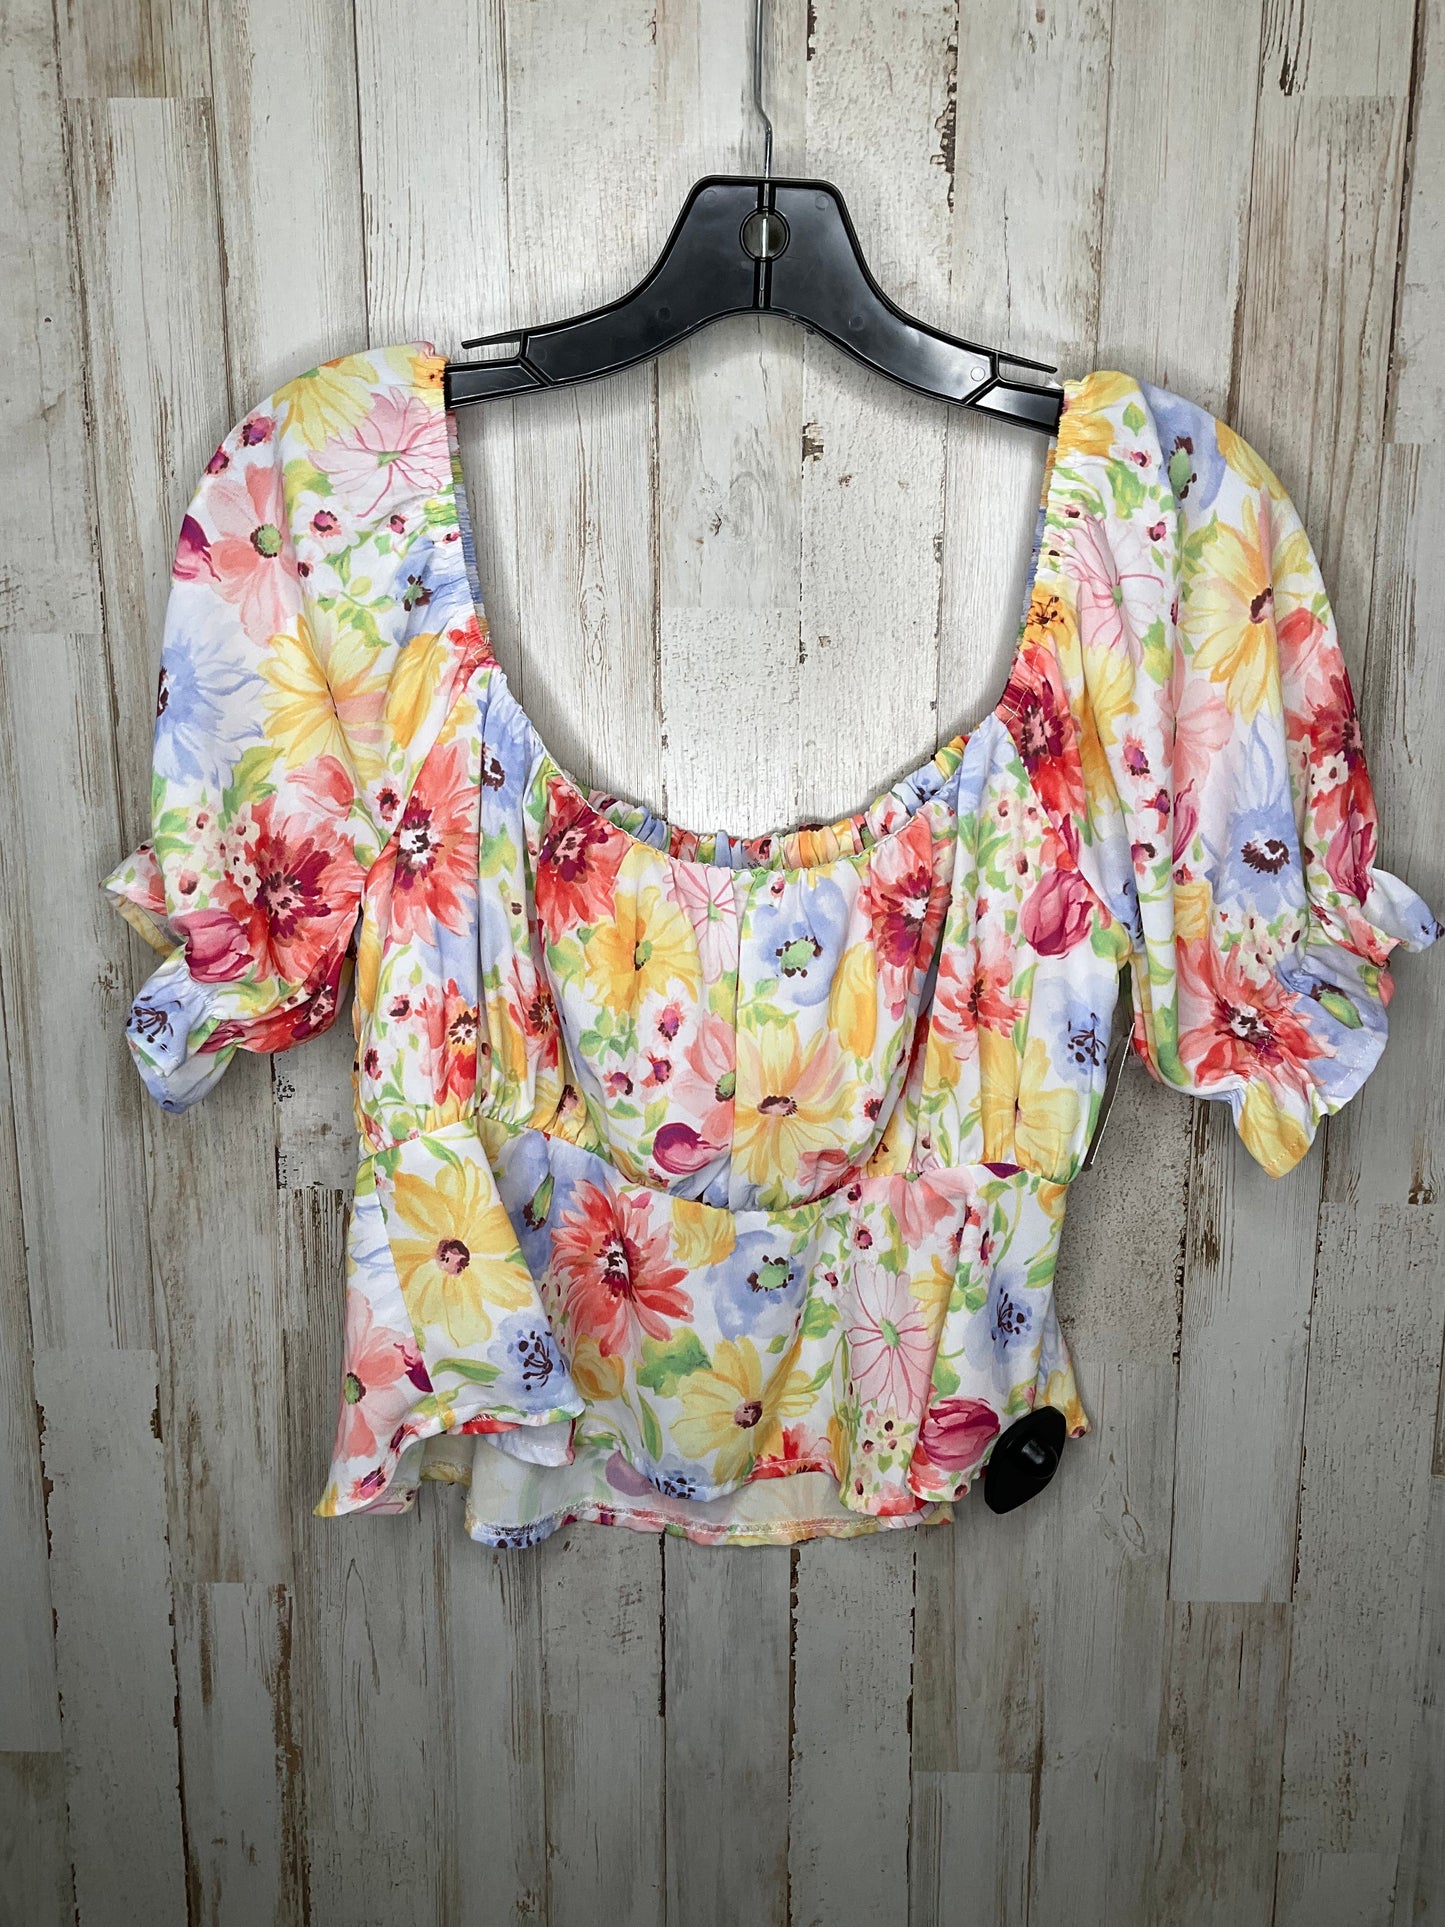 Floral Print Top Short Sleeve Clothes Mentor, Size M